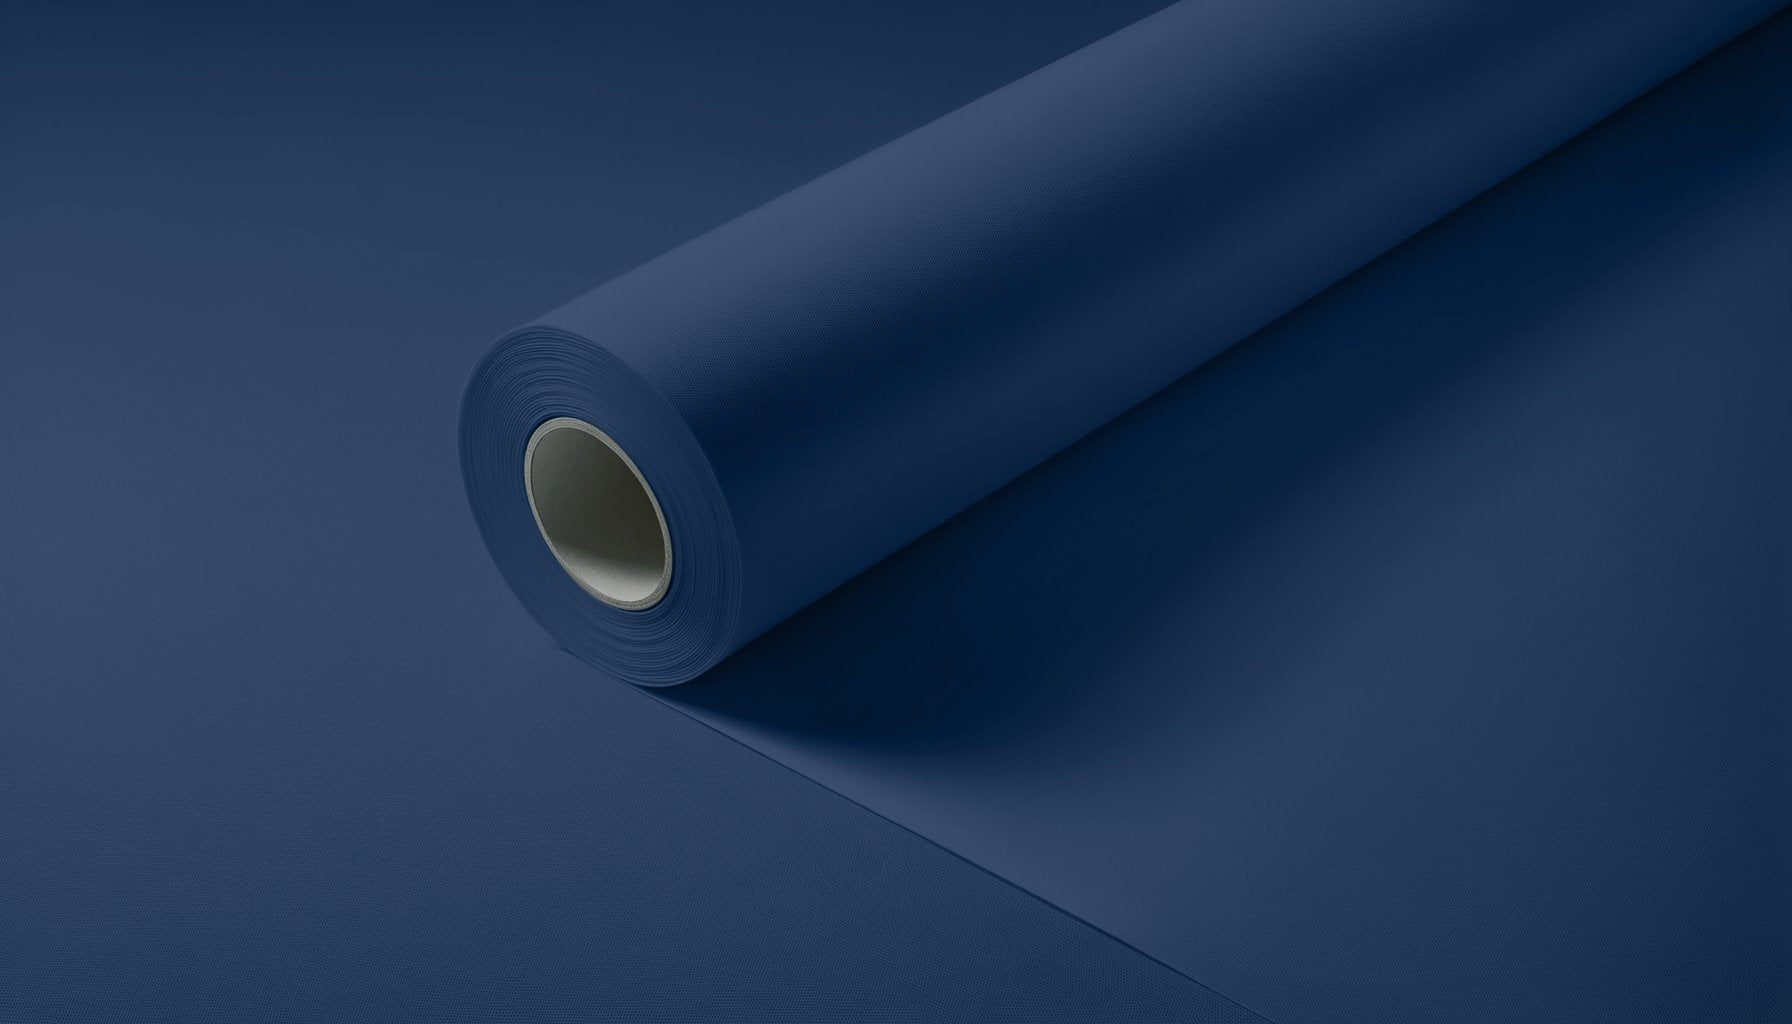 Peel & Stick Removable Re-usable Paint - Color RAL 5026 Pearl Night Blue - offRAL™ - RALRAW LLC, USA